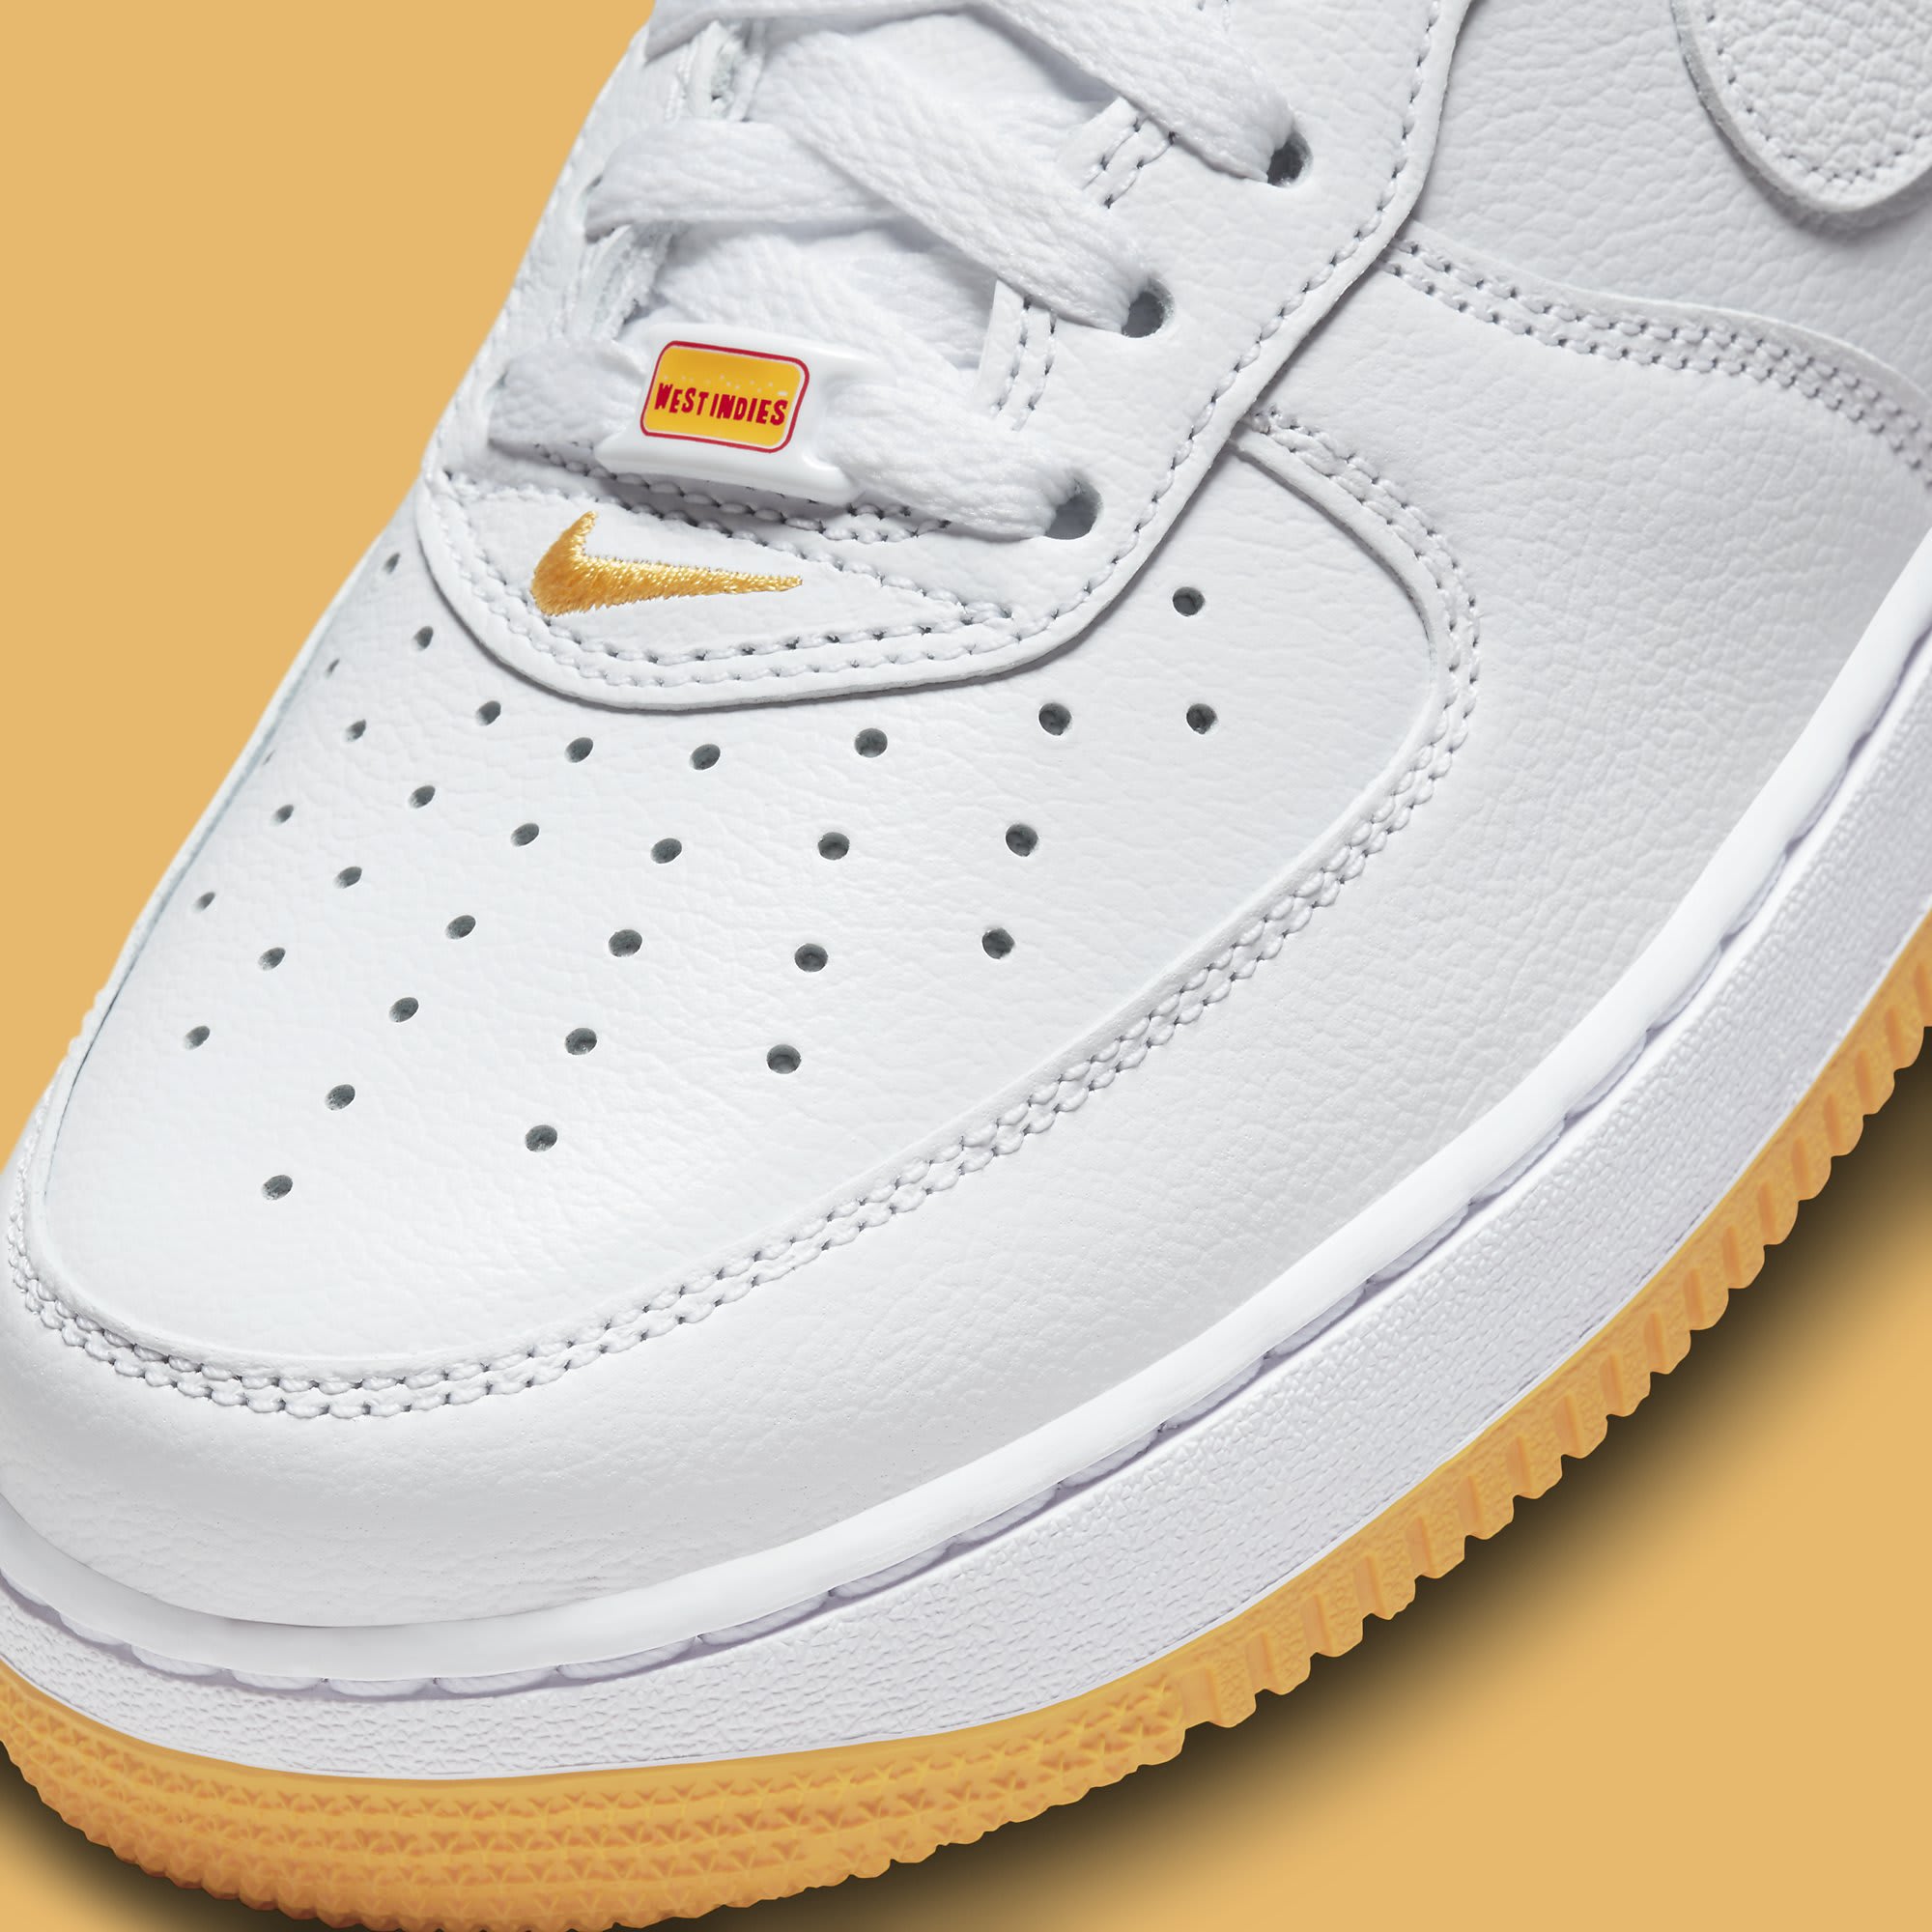 Nike Air Force 1 Low West Indies White Yellow Release Date DX1156-101 Toe Detail